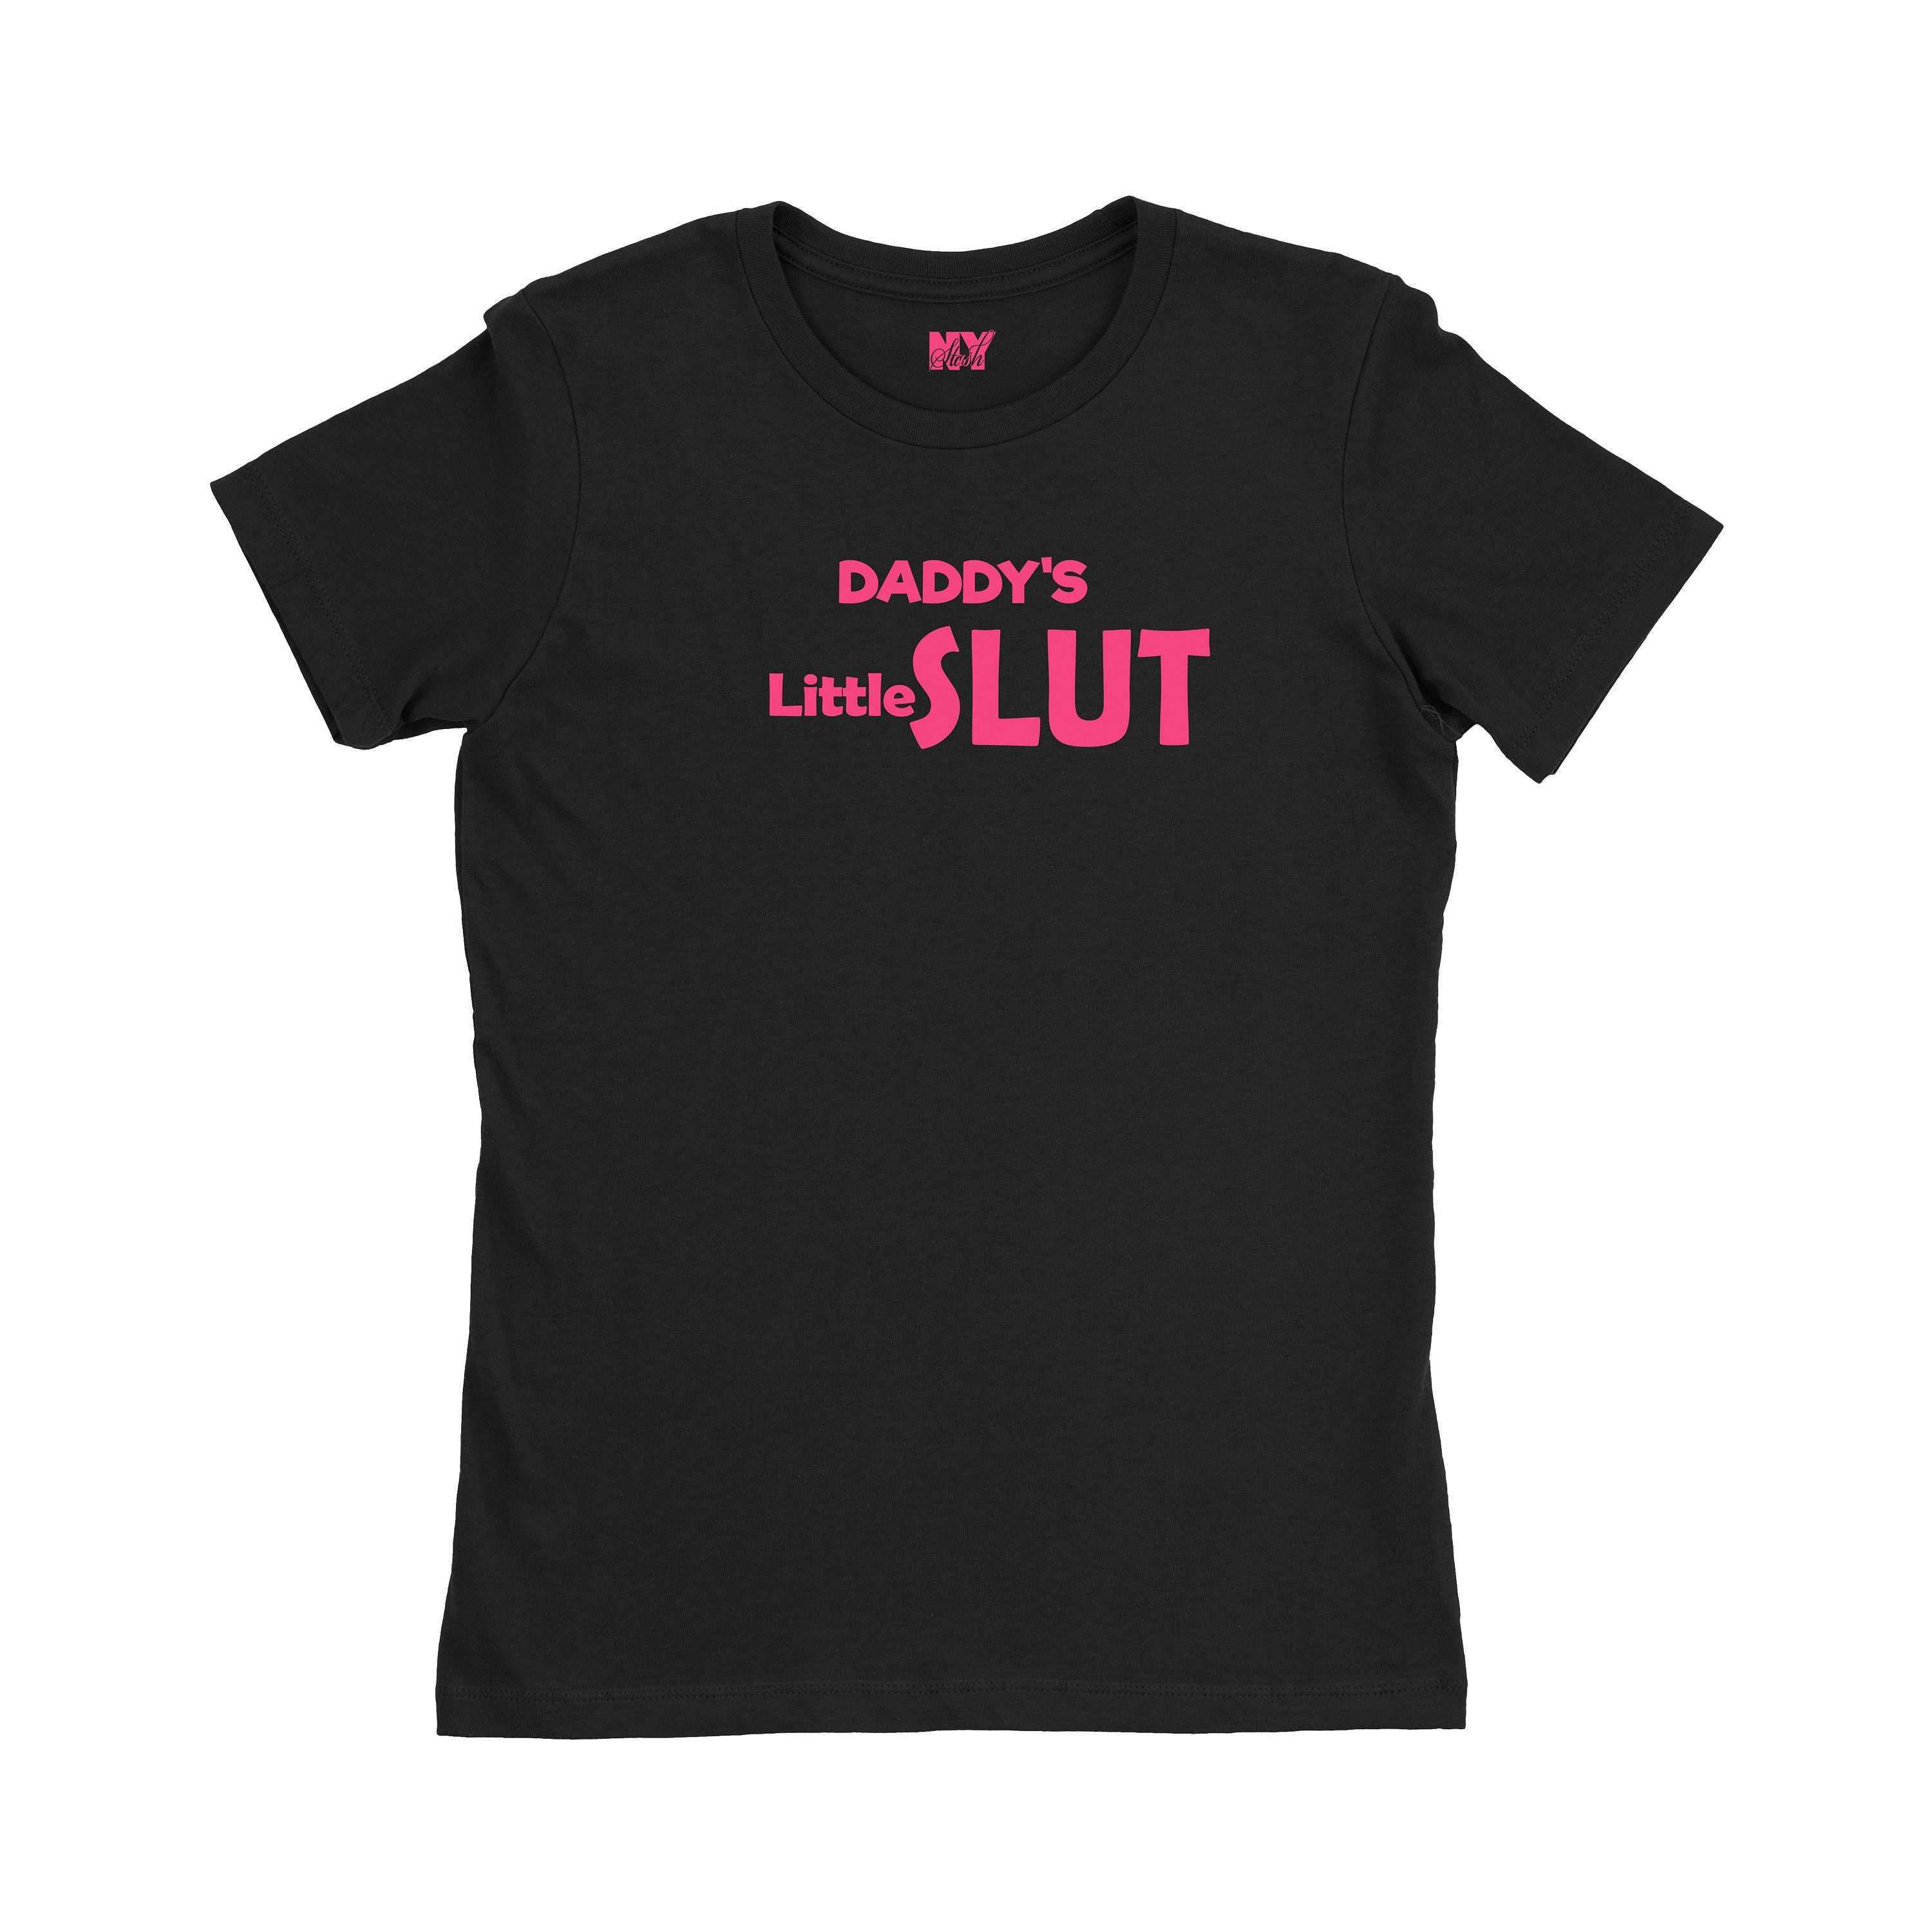 Daddys Little Slut Shirt Ddlg Clothing Sexy Slutty Cute Funny Submissive Naughty Bachelorette